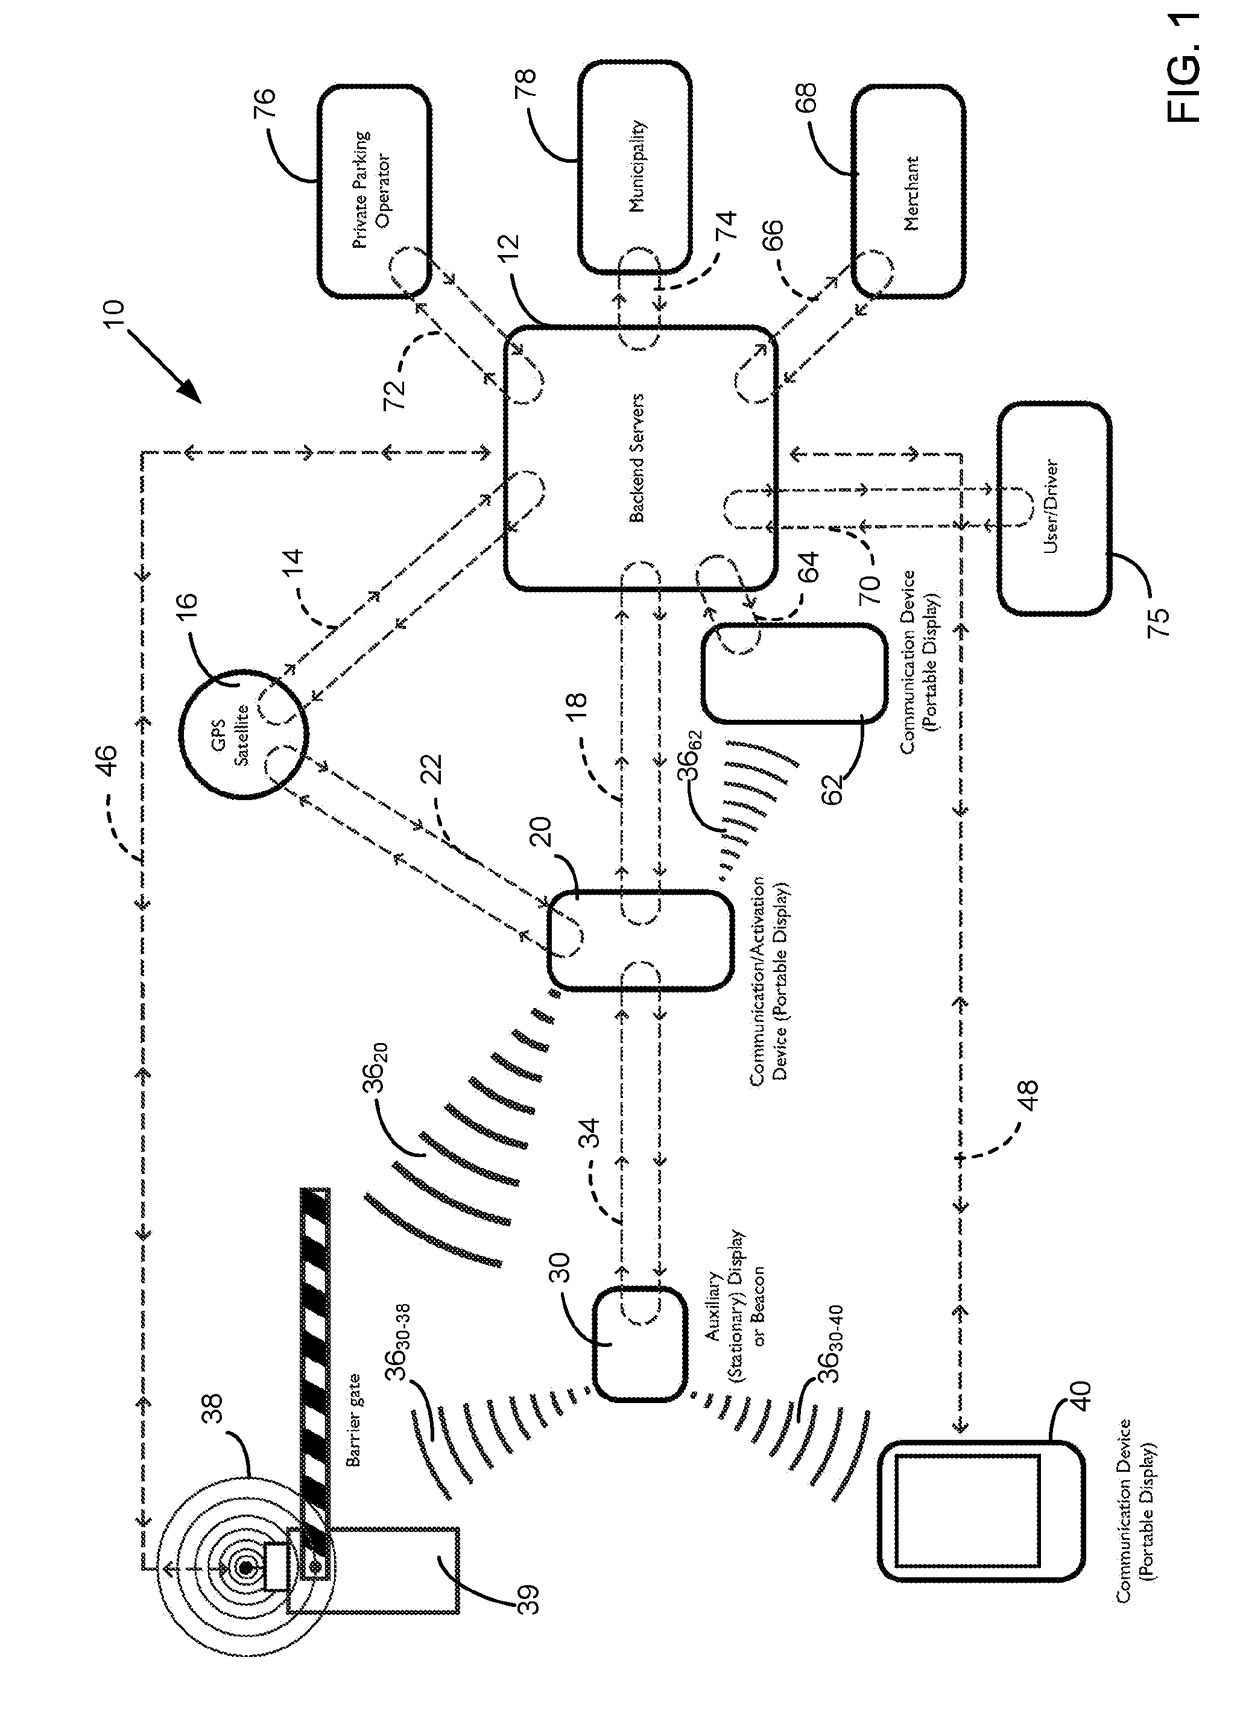 Transaction payment processing system implementing a virtual exchange platform